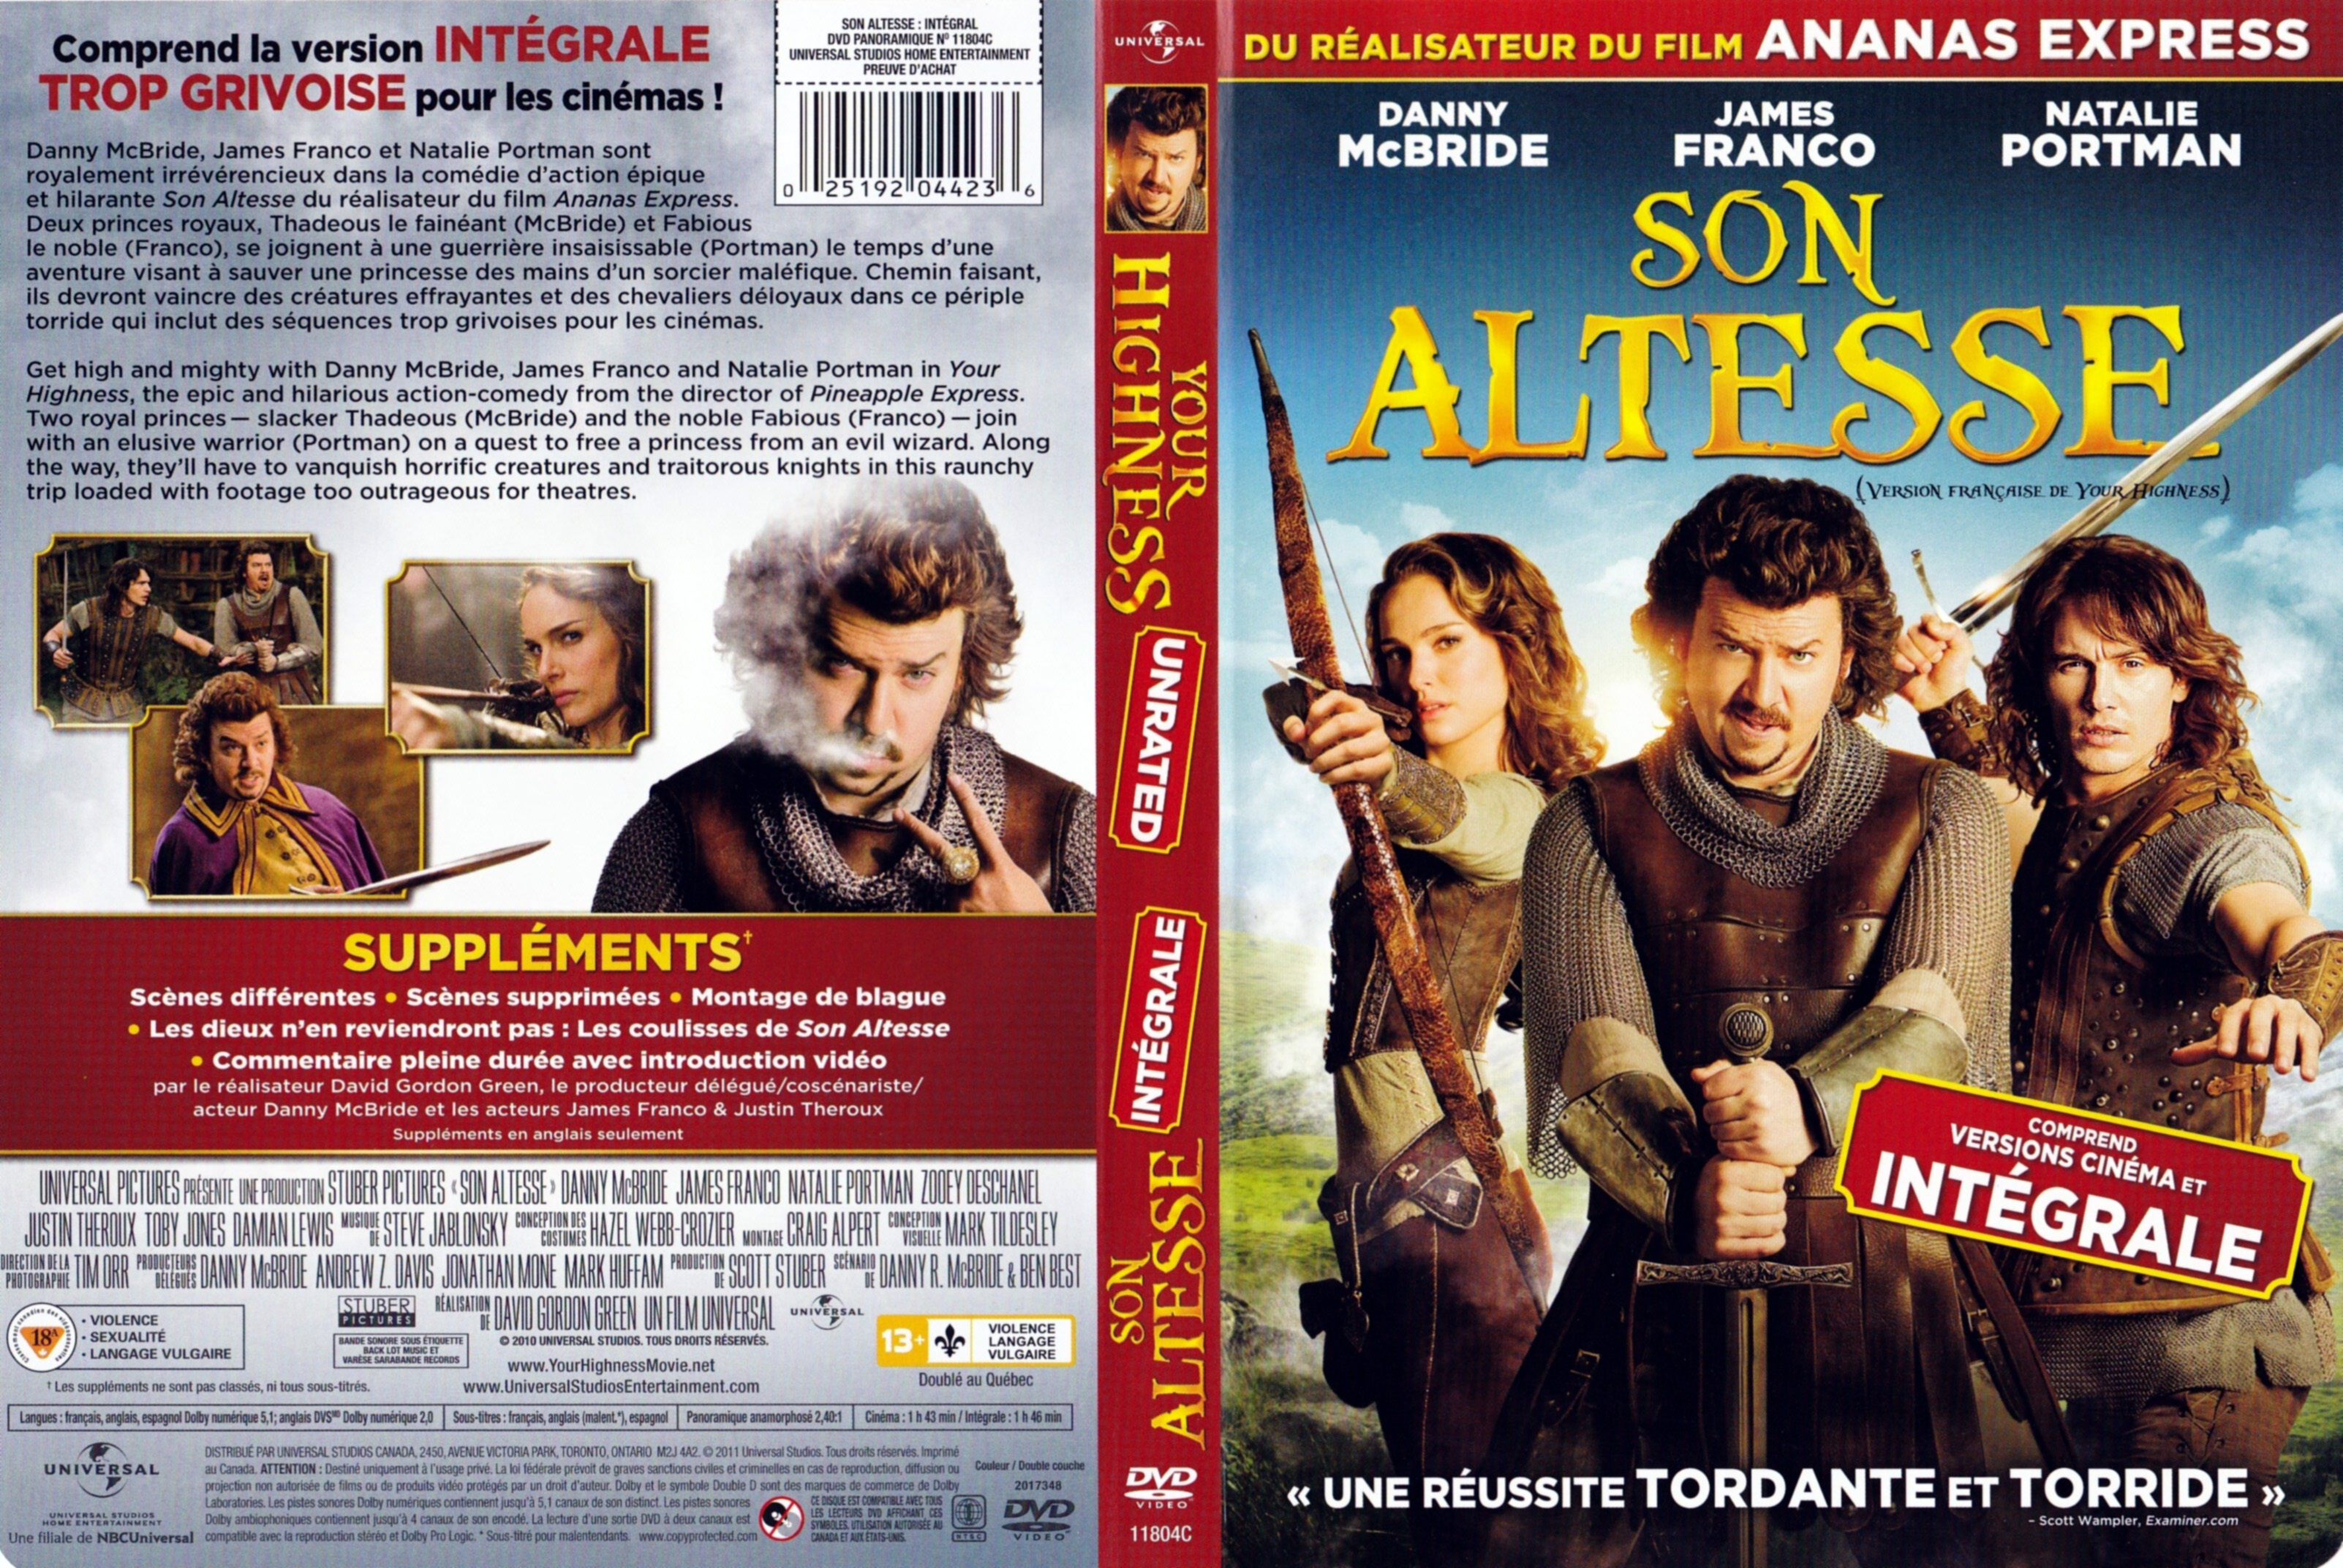 Jaquette DVD Son altesse - Your highness (Canadienne)